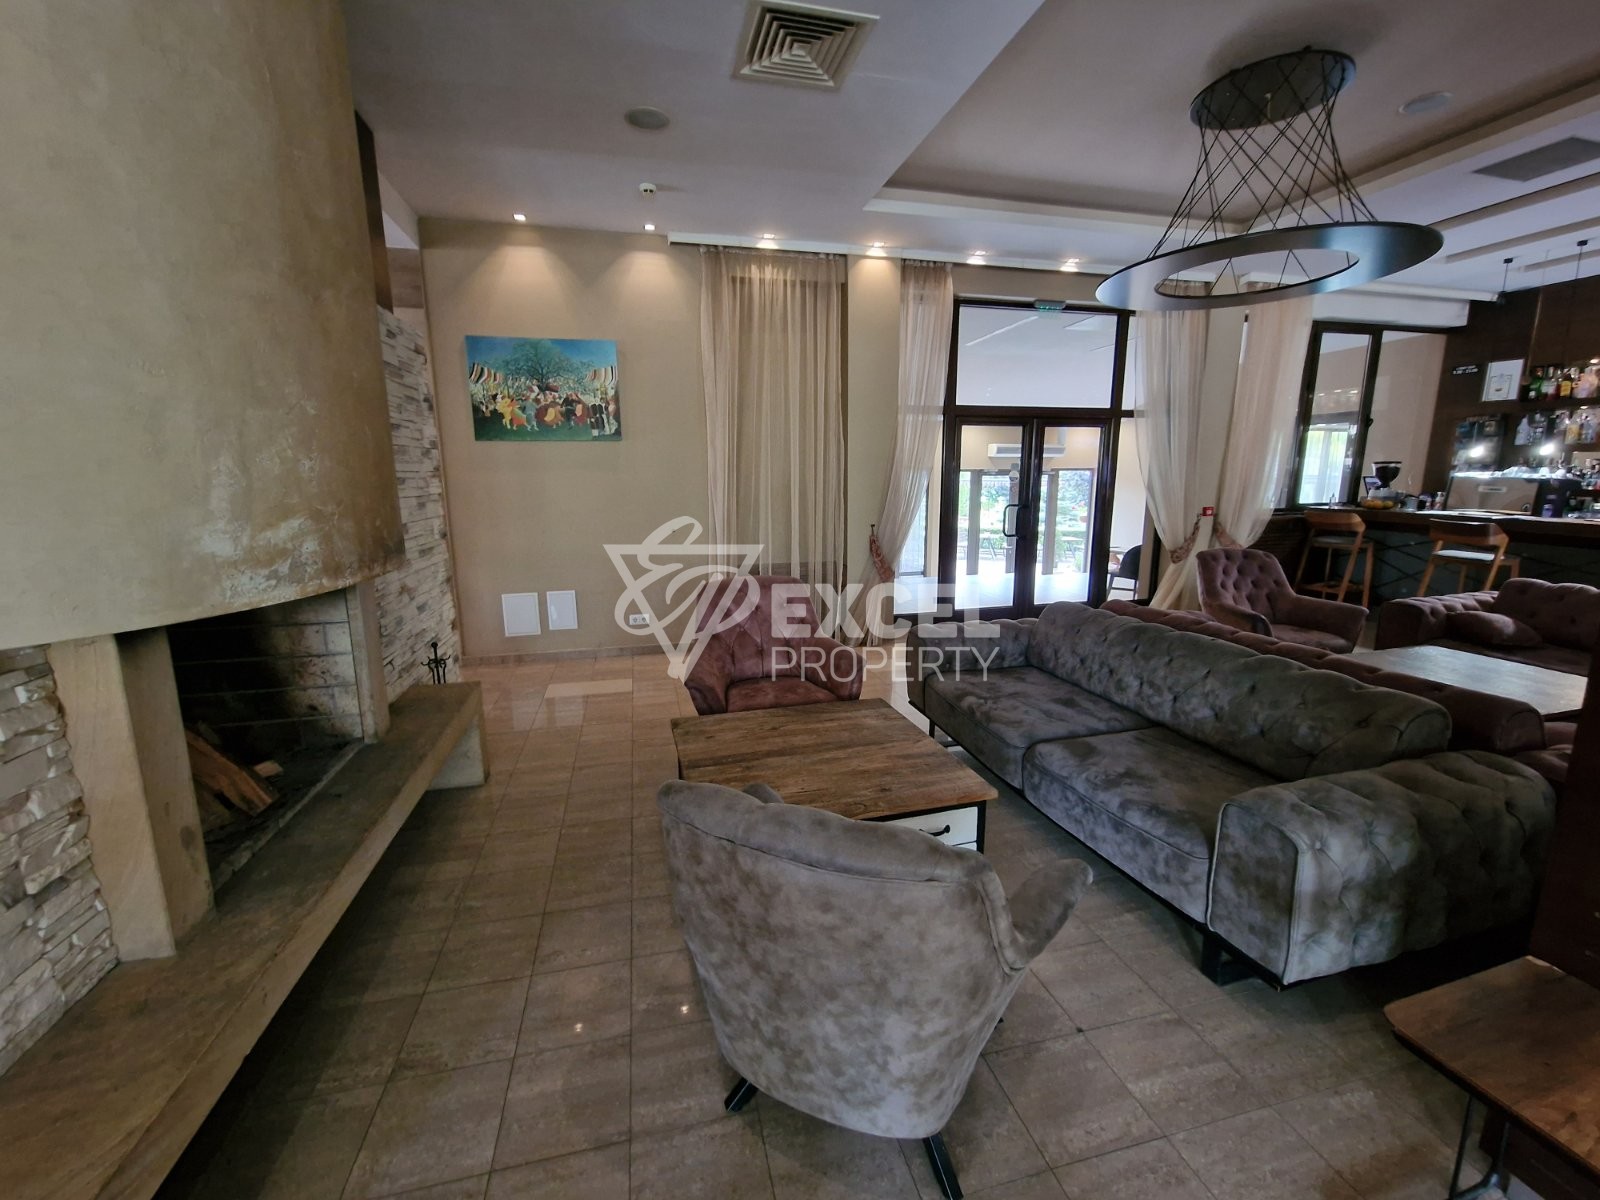 South two-bedroom apartment with a spacious terrace in the year-round Park Hotel Murite complex